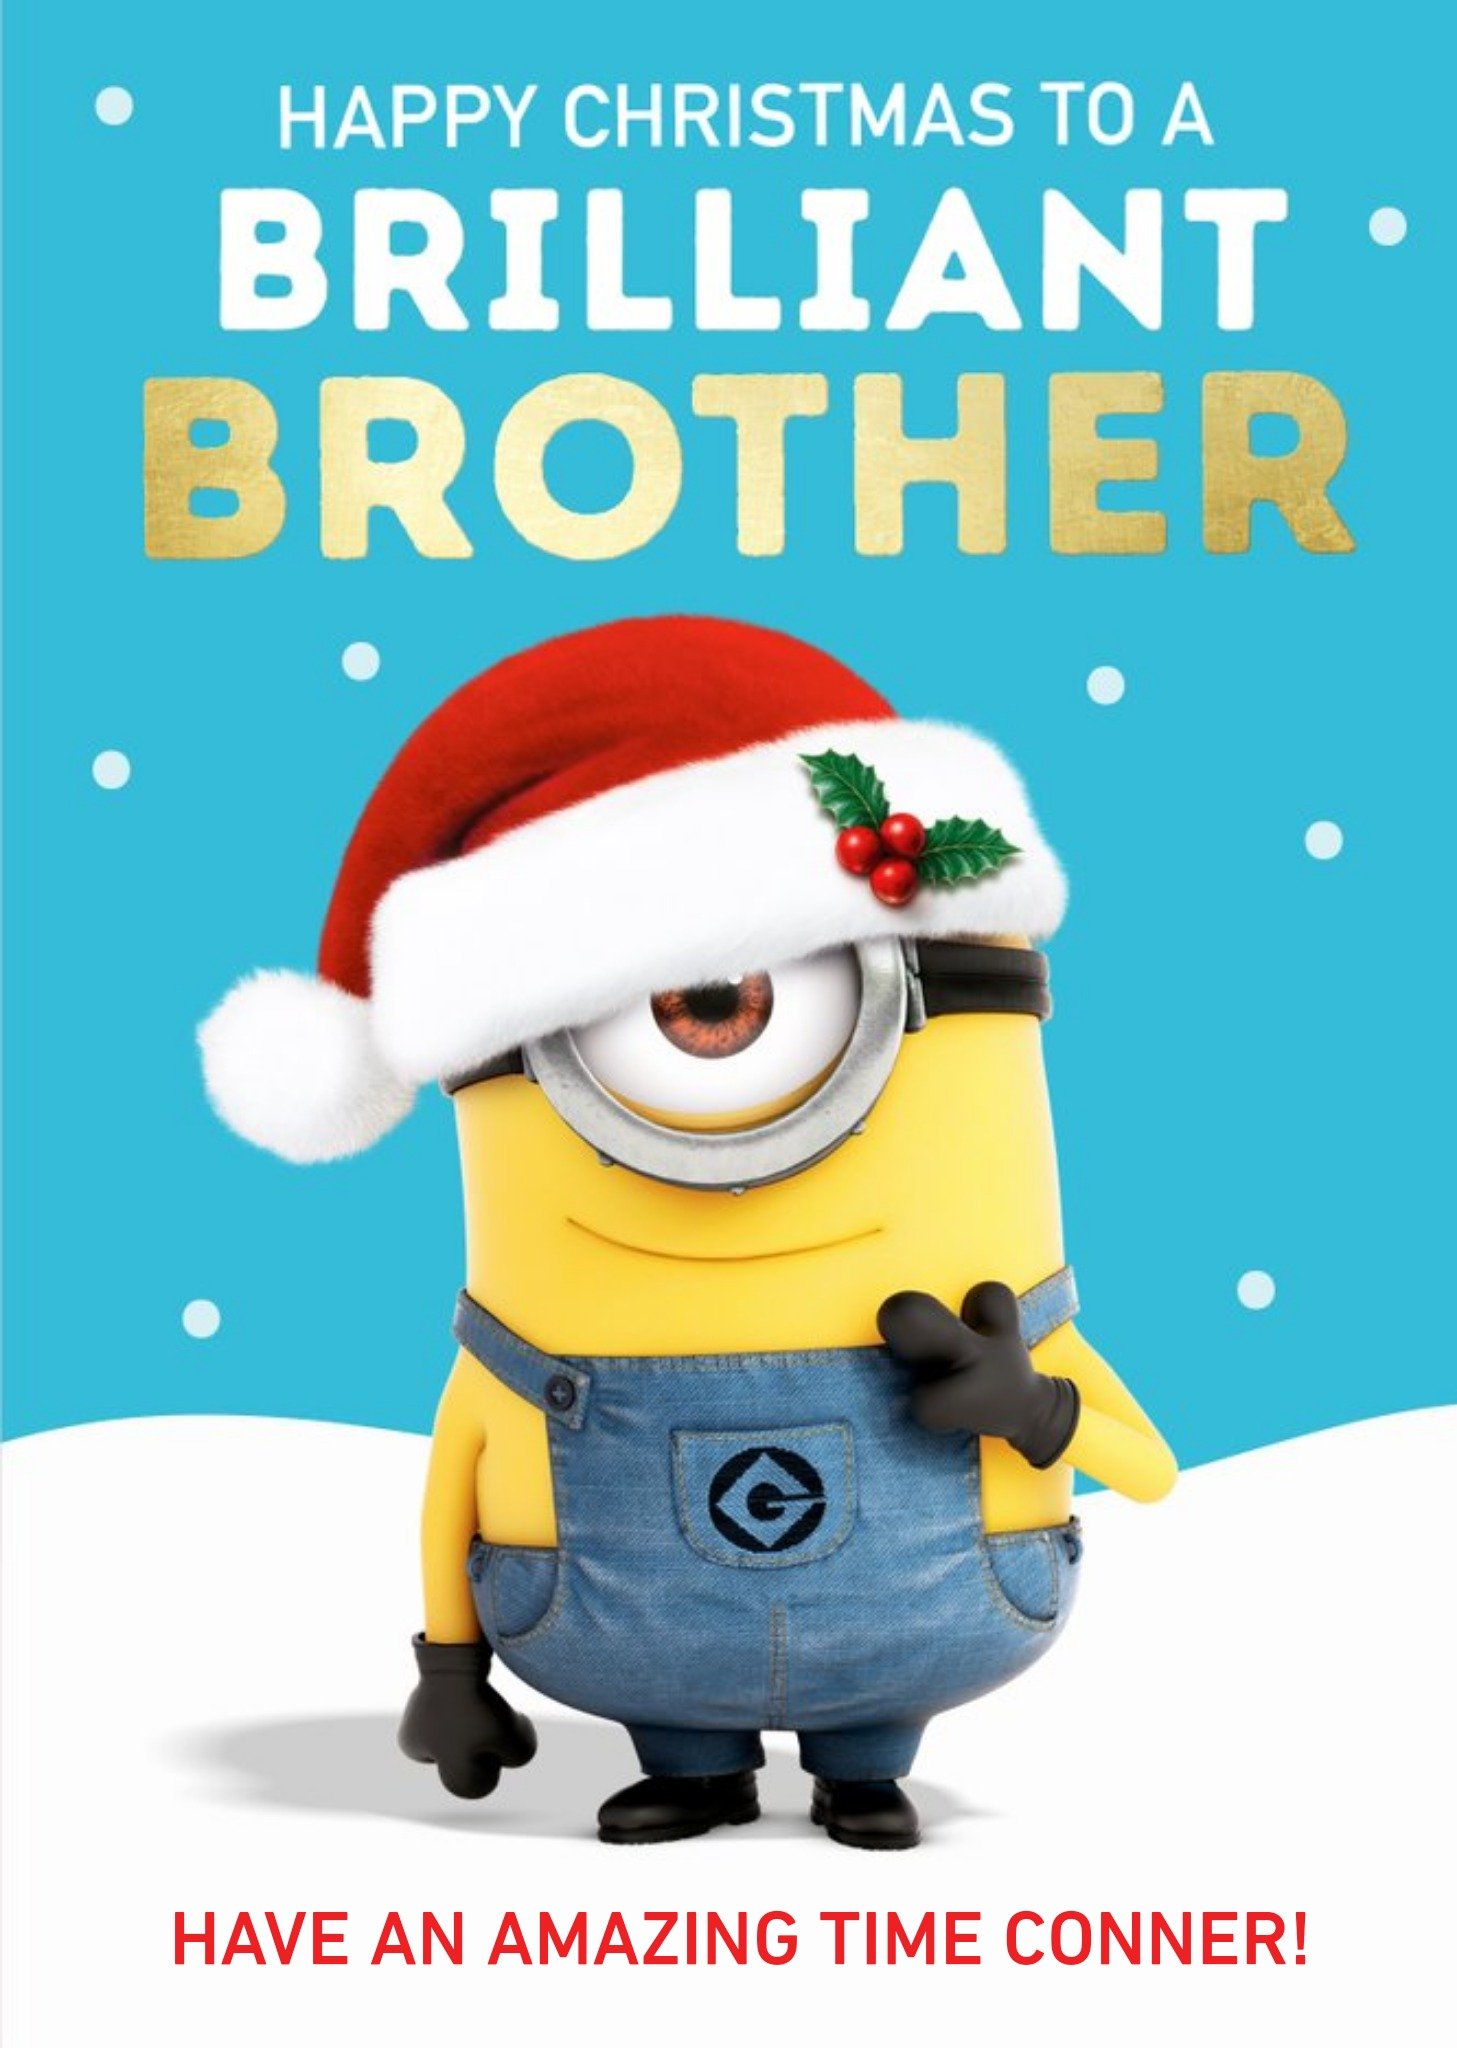 Despicable Me Minions Christmas Card To A Brilliant Brother, Large